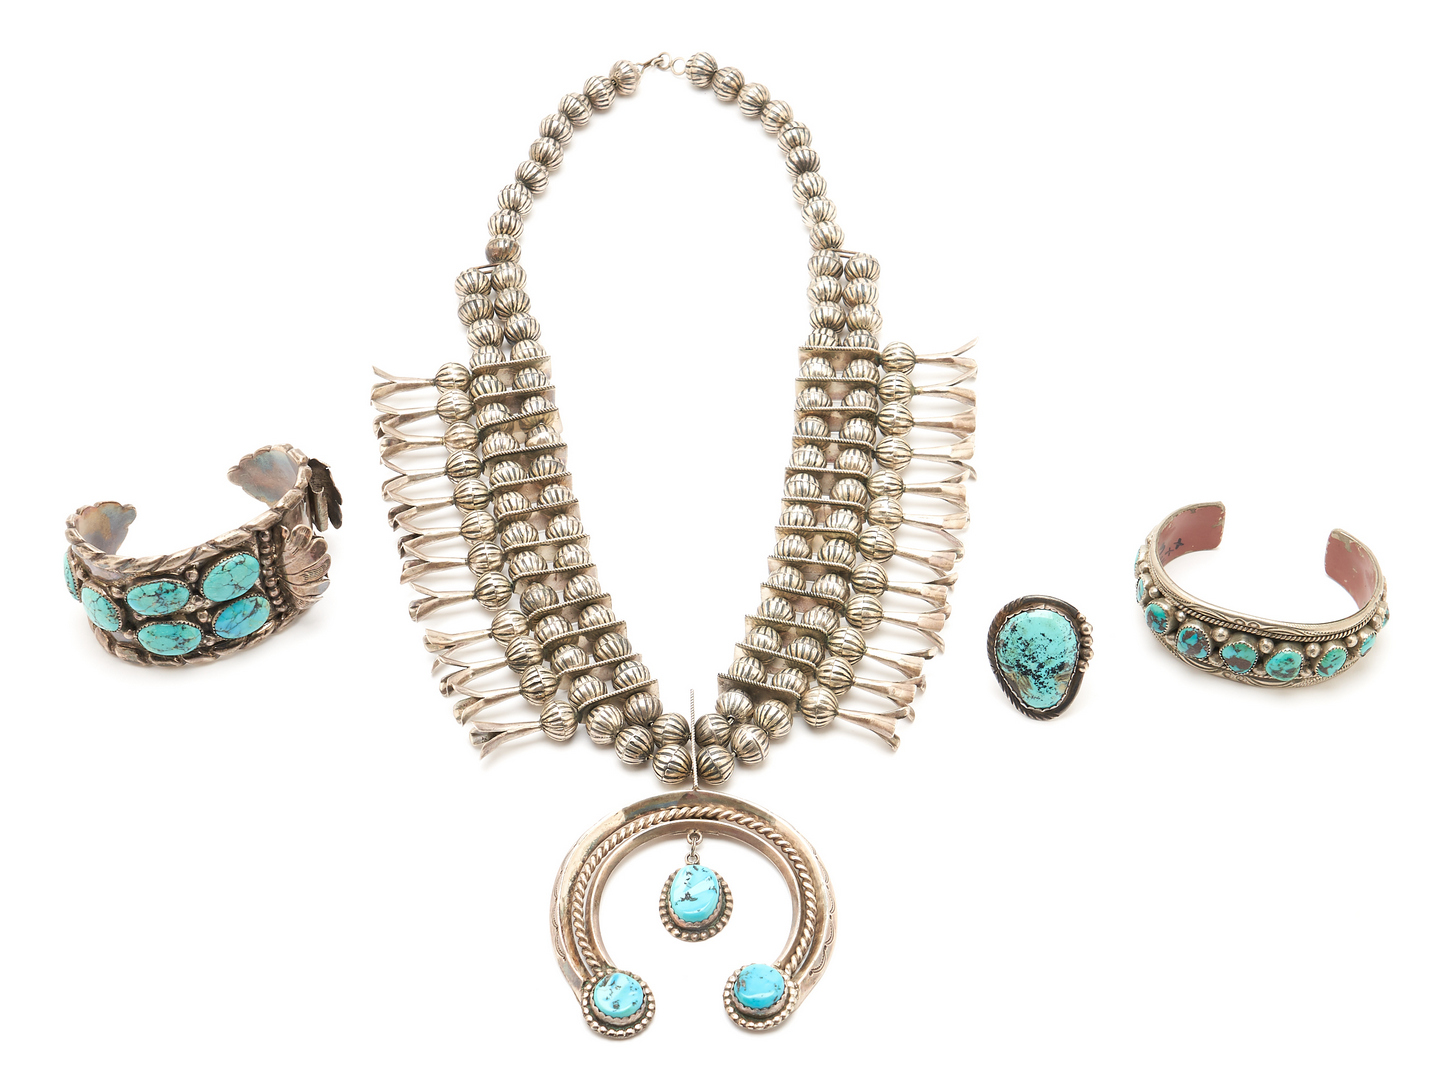 Lot 1083: 4 Pcs. Native American Navajo Turquoise & Silver Jewelry